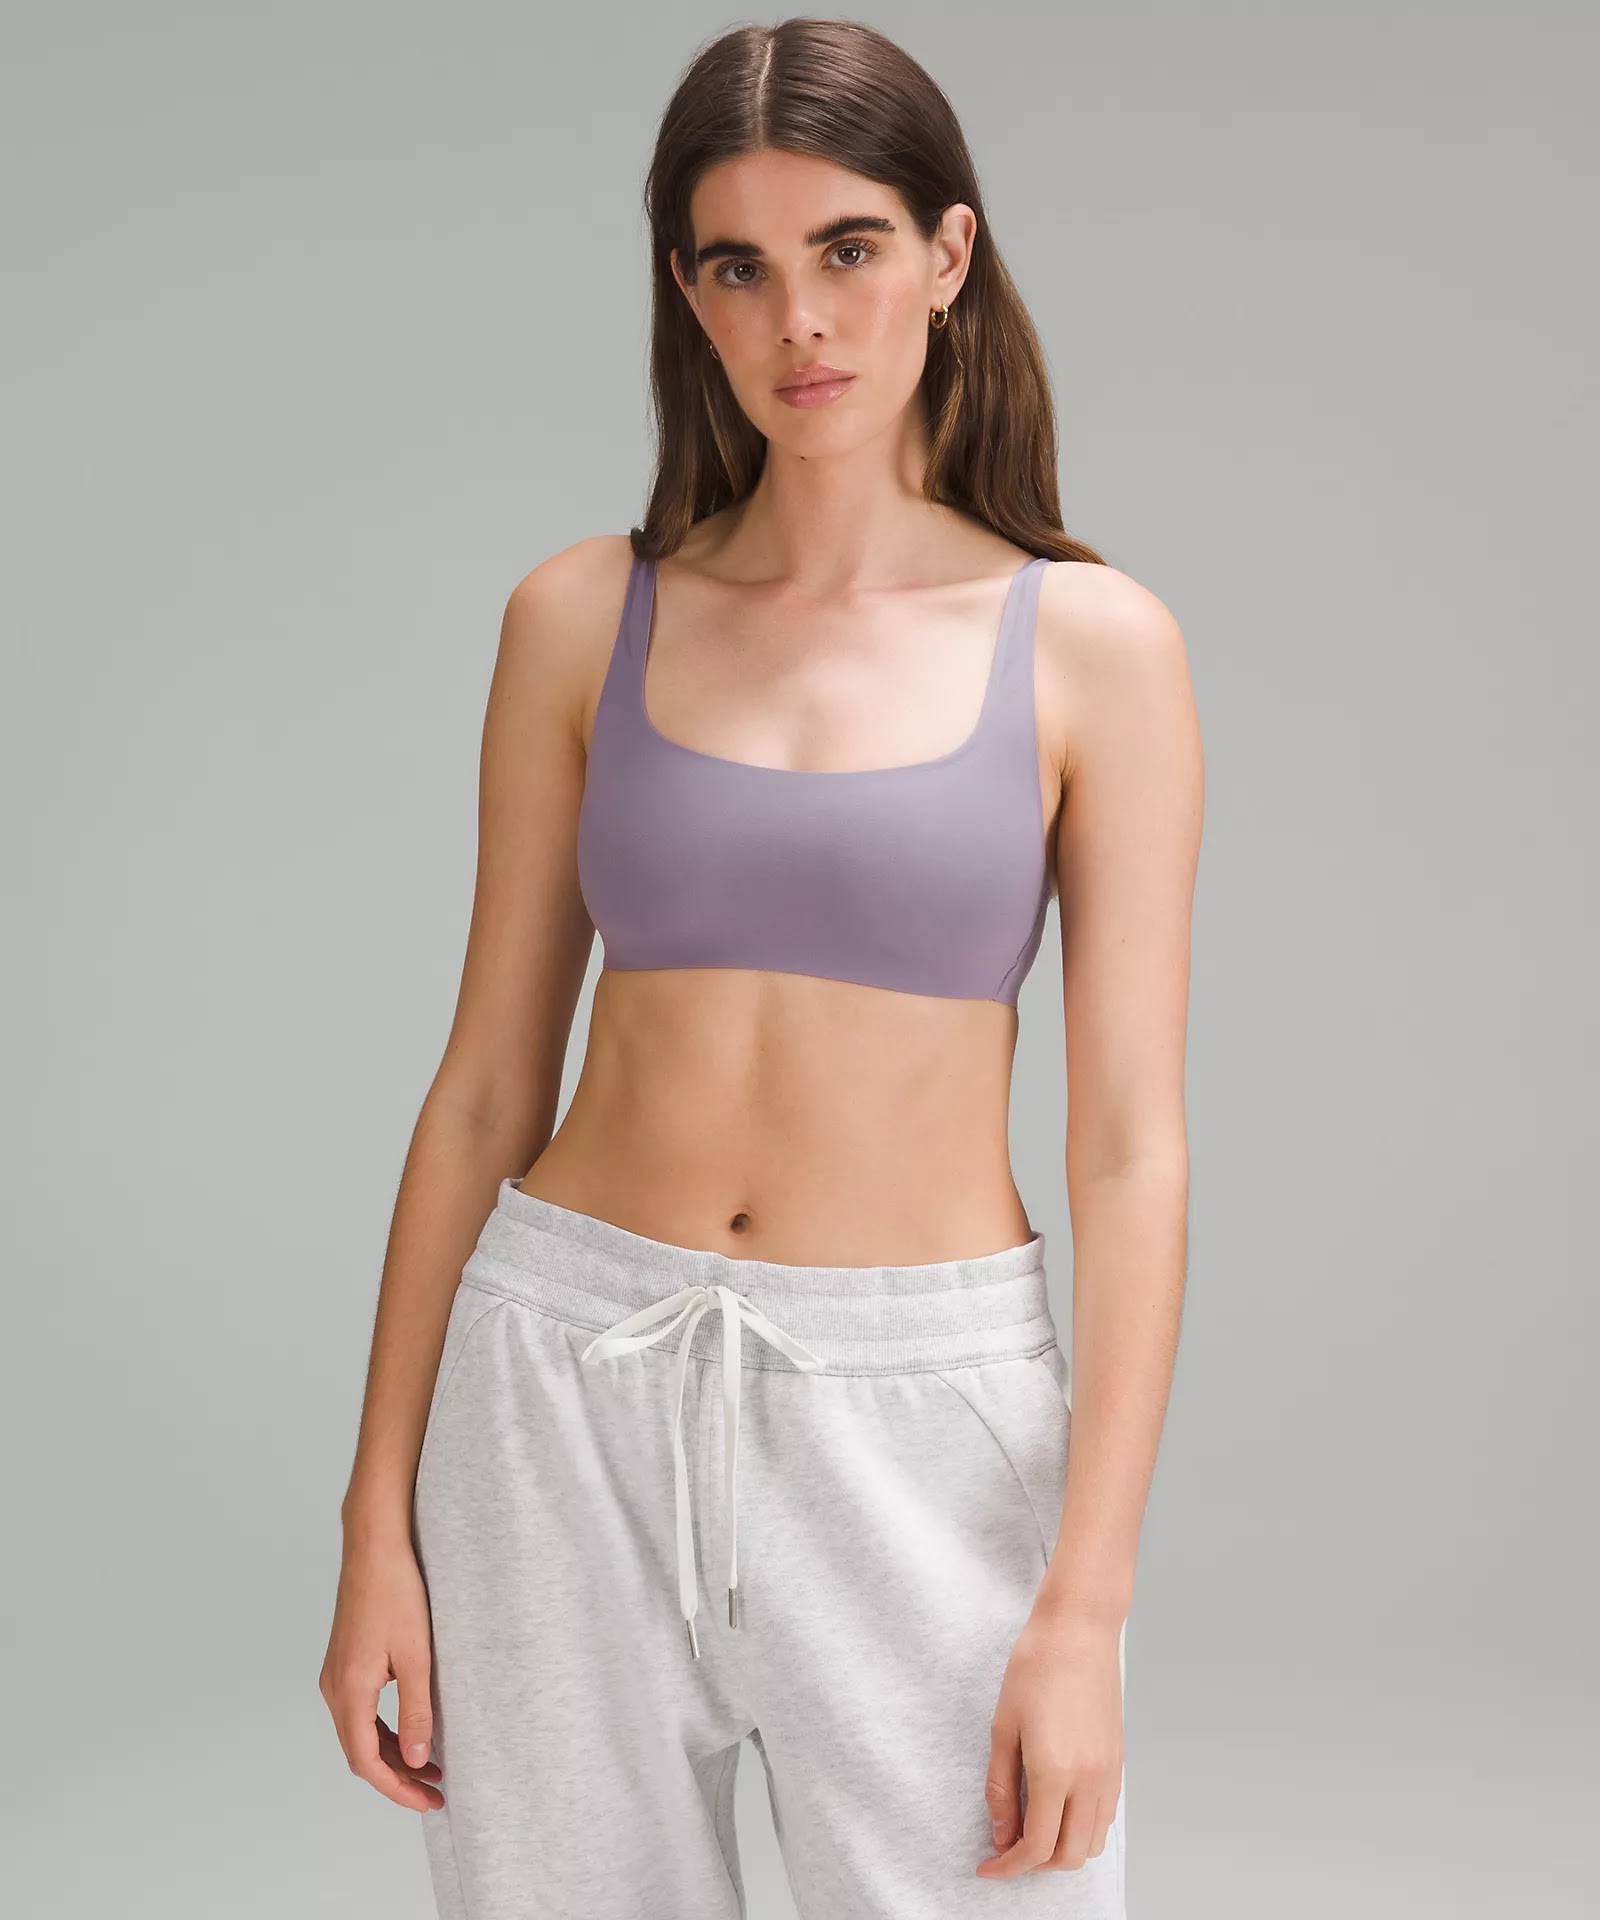 FIt Review! Wundermost Ultra-Soft Nulu Scoop Neck Strap Bra & Naked  Cashmere 30% Off Cardigan Sale This Weekend Only